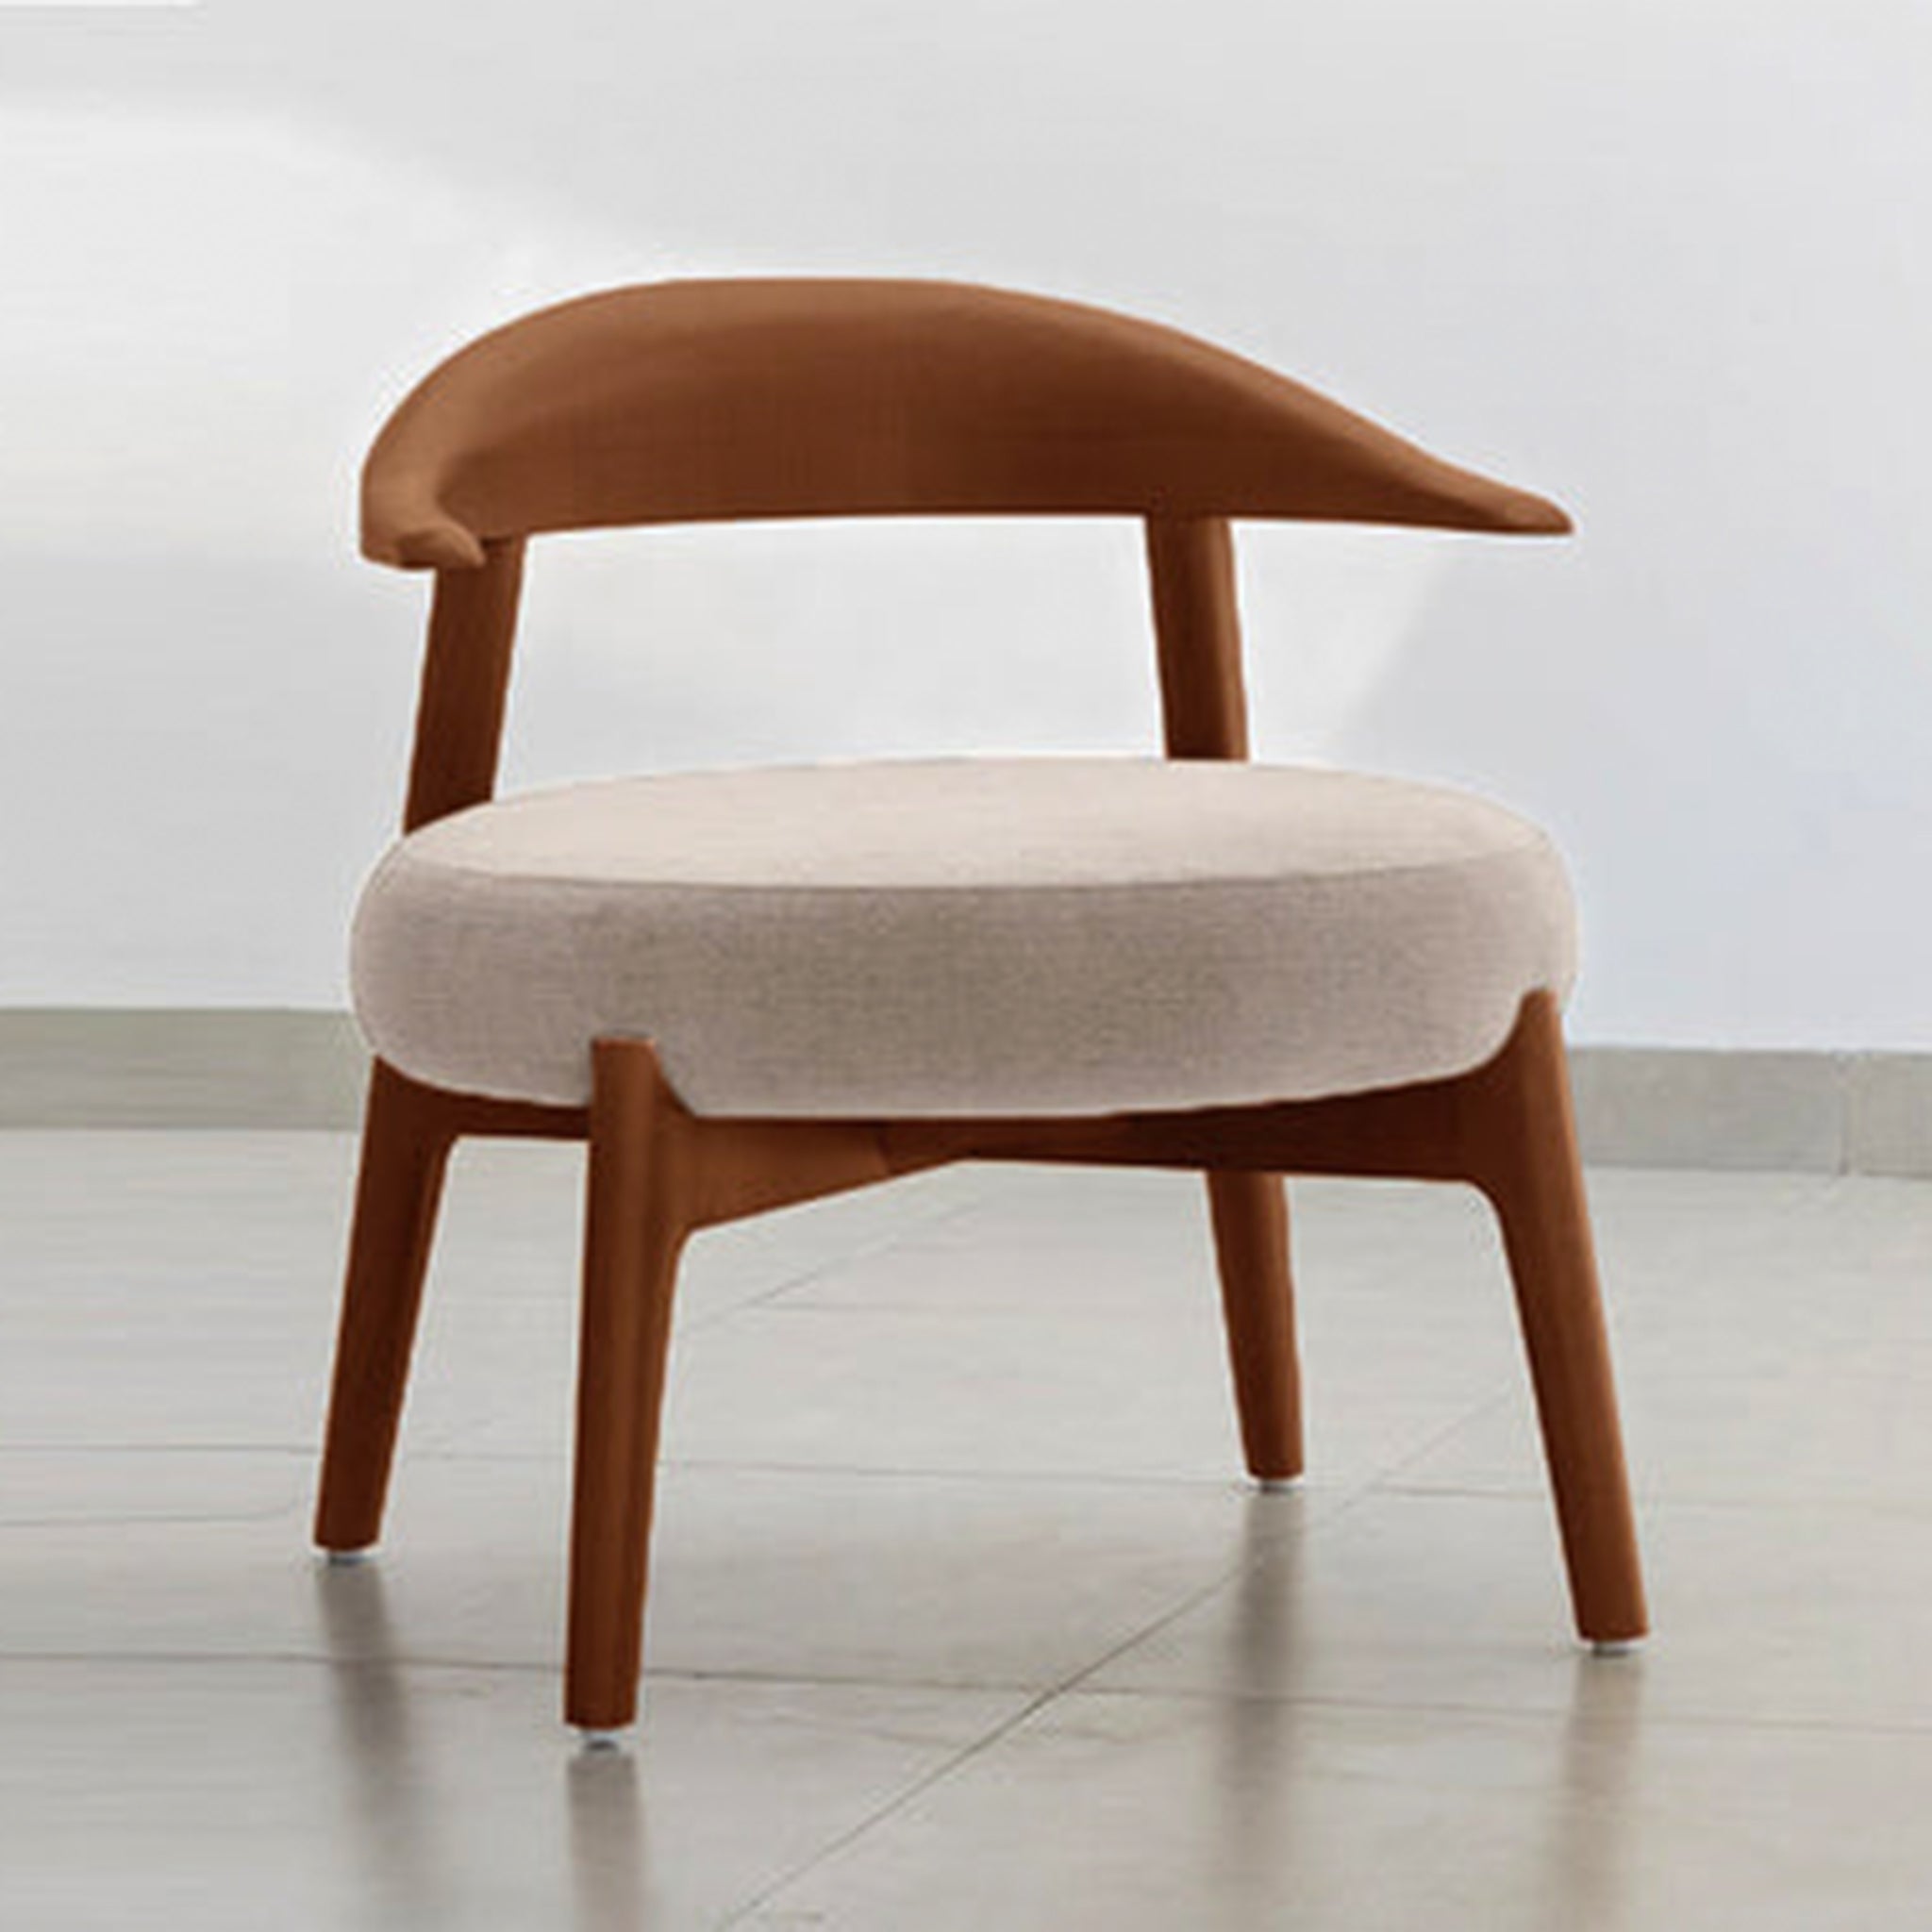 "The Hyde Accent Chair with sleek wooden design and comfortable fabric"